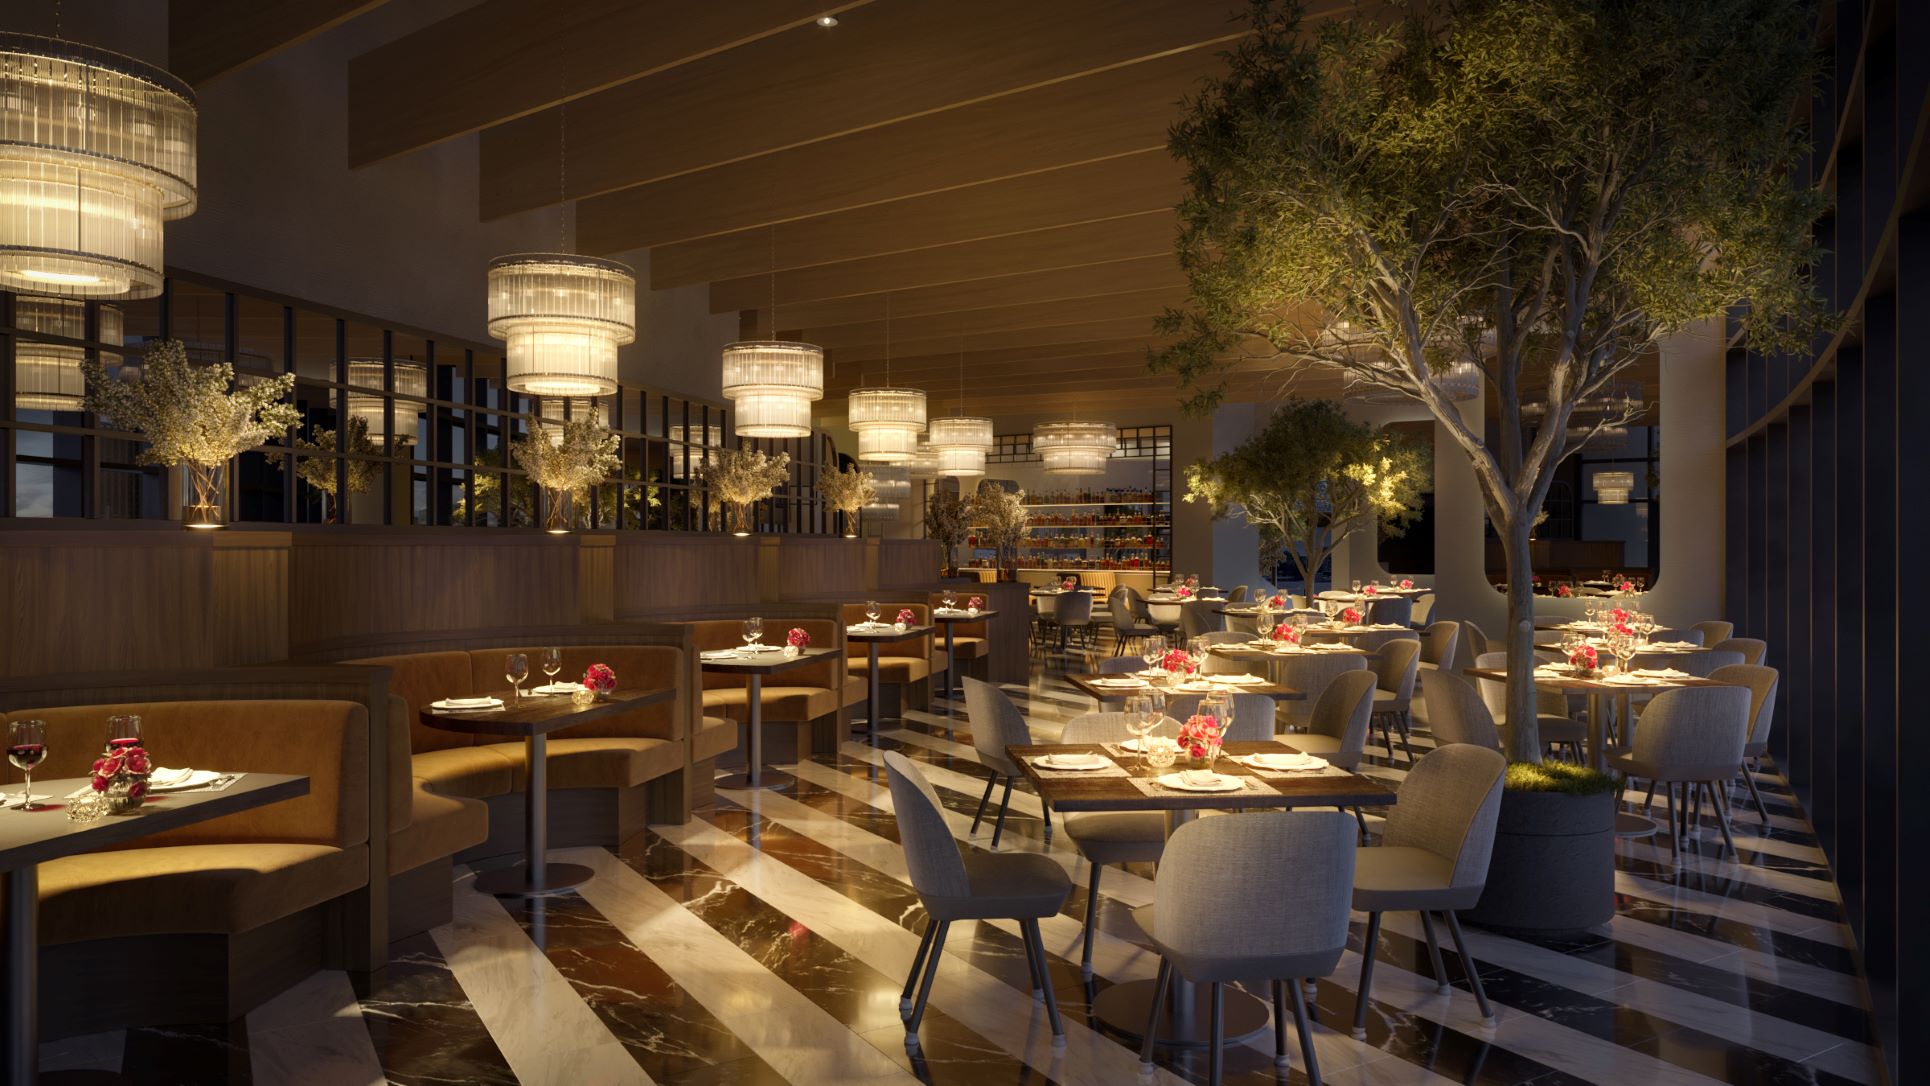 Rendering of the Fort Lauderdale dining room with chandeliers, booths, tables and chairs